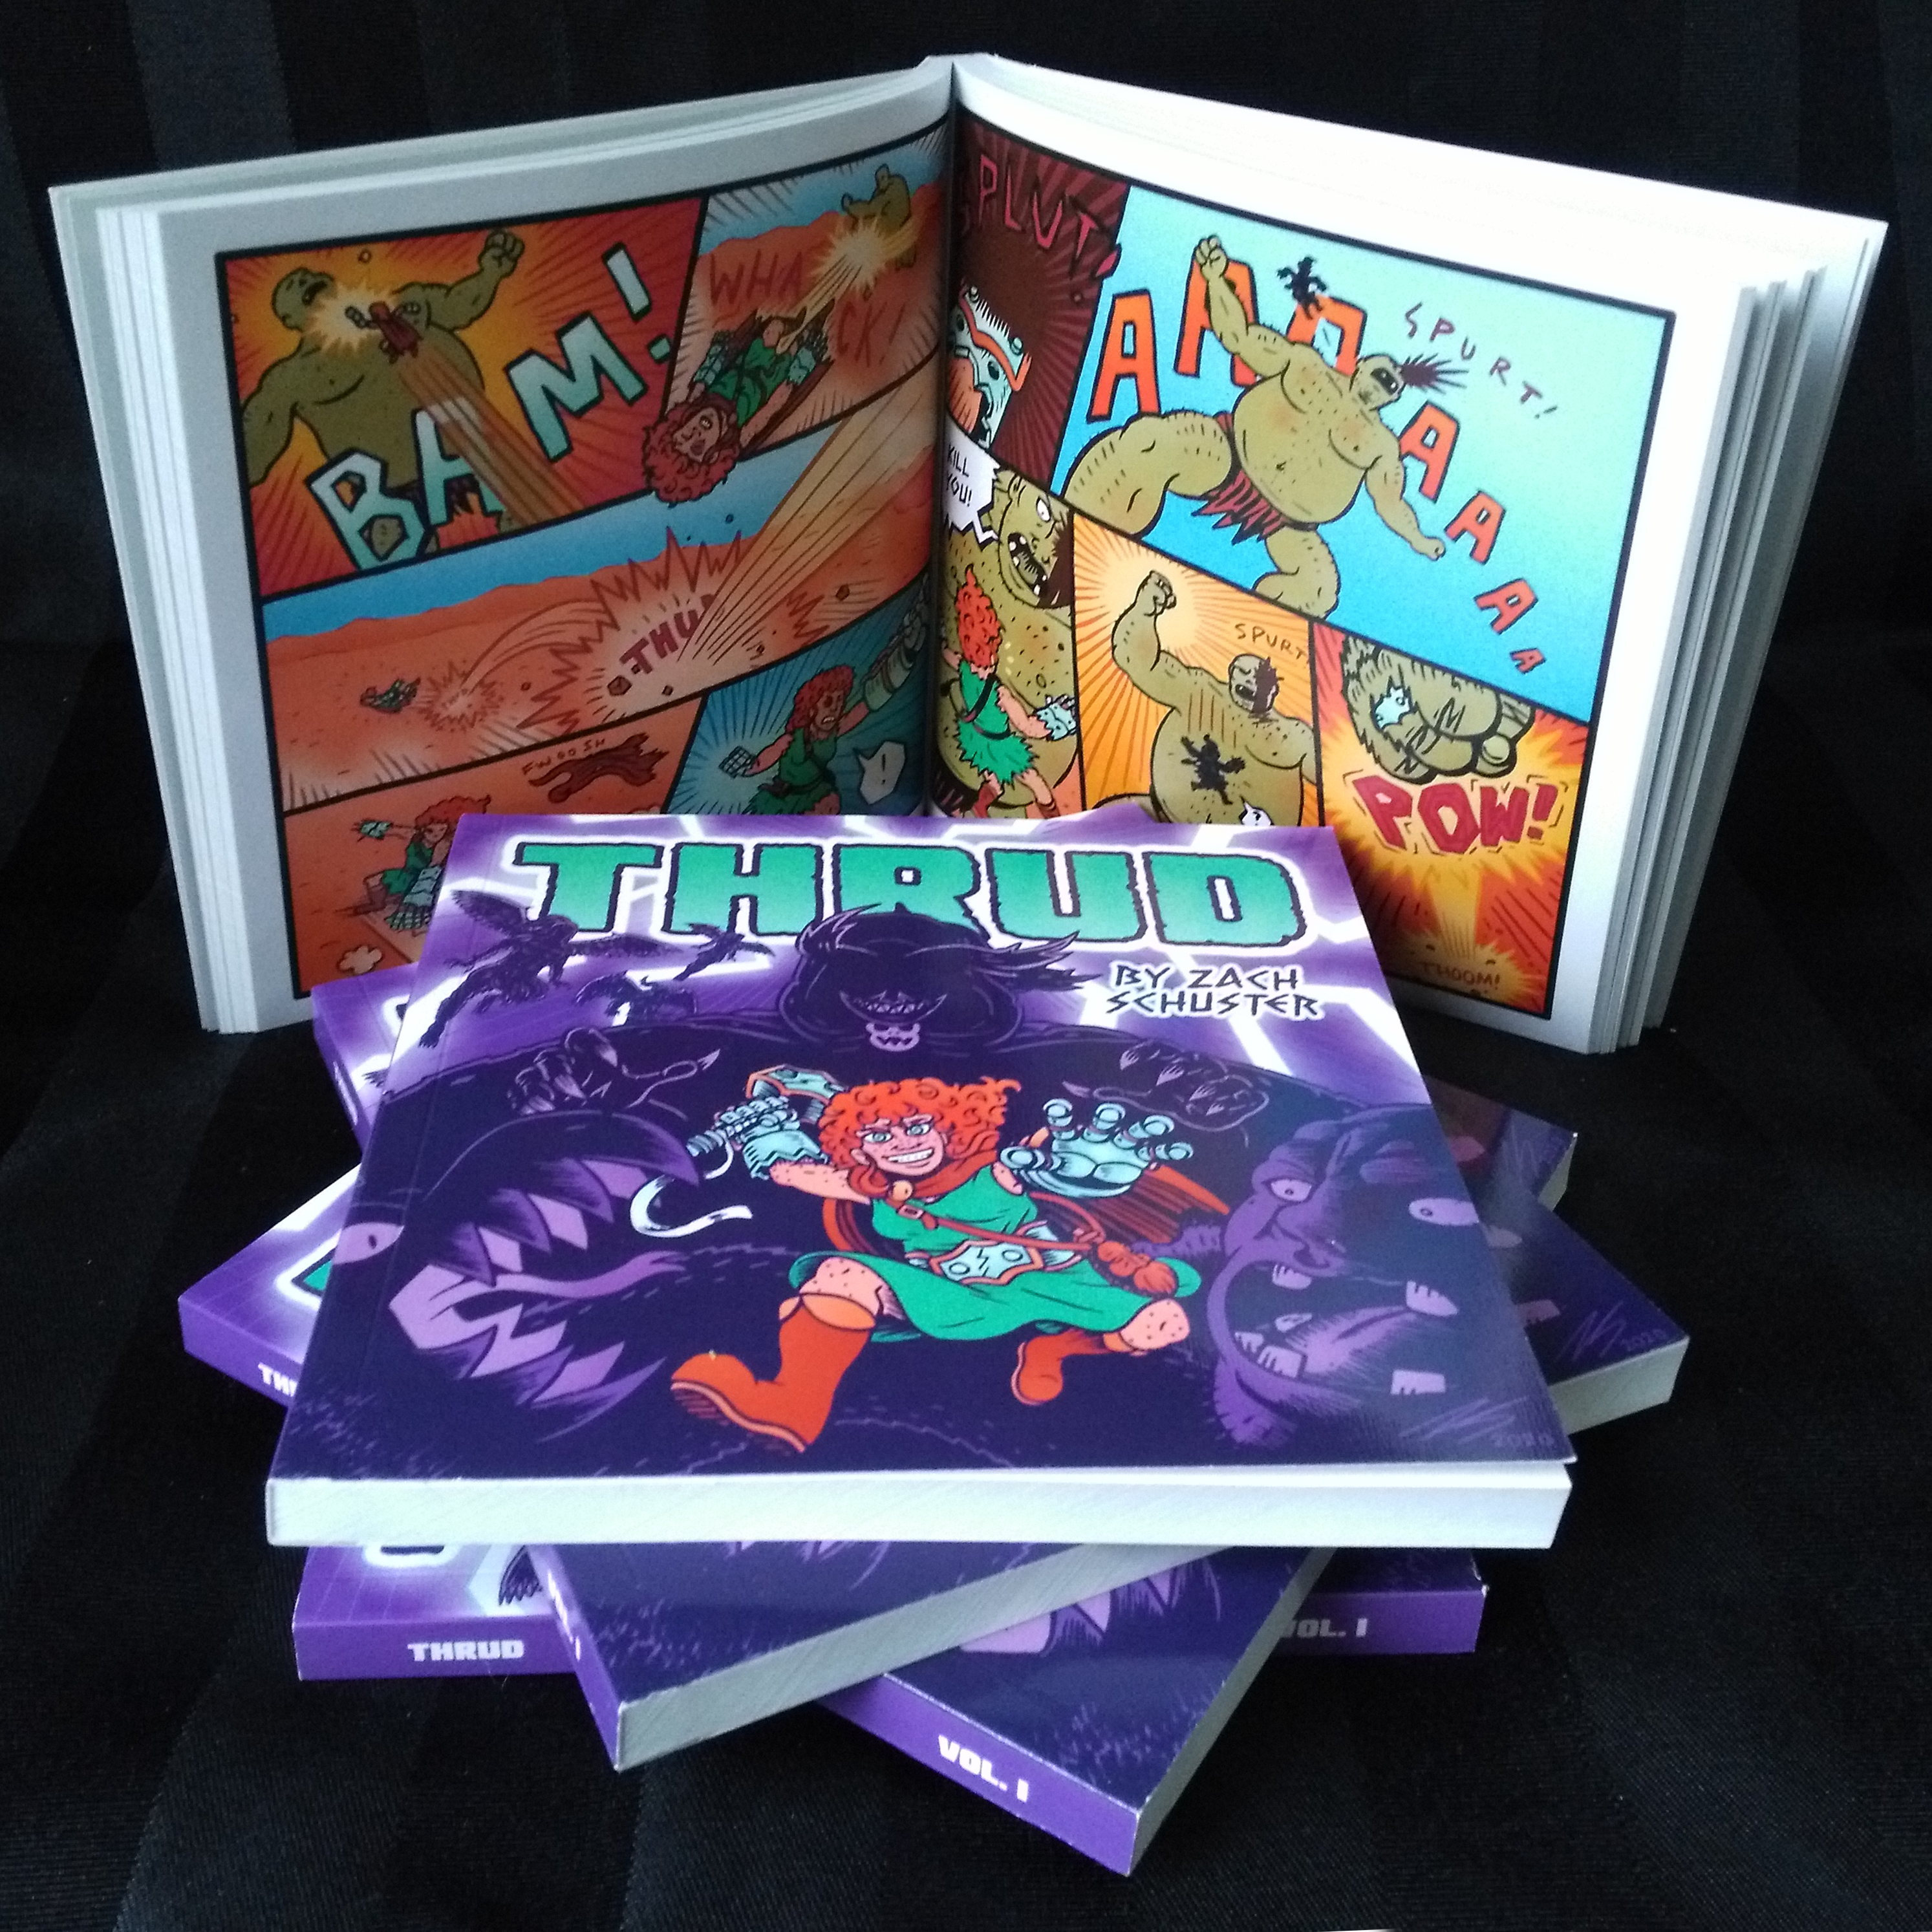 A picture of the Thrud: Volume I comic